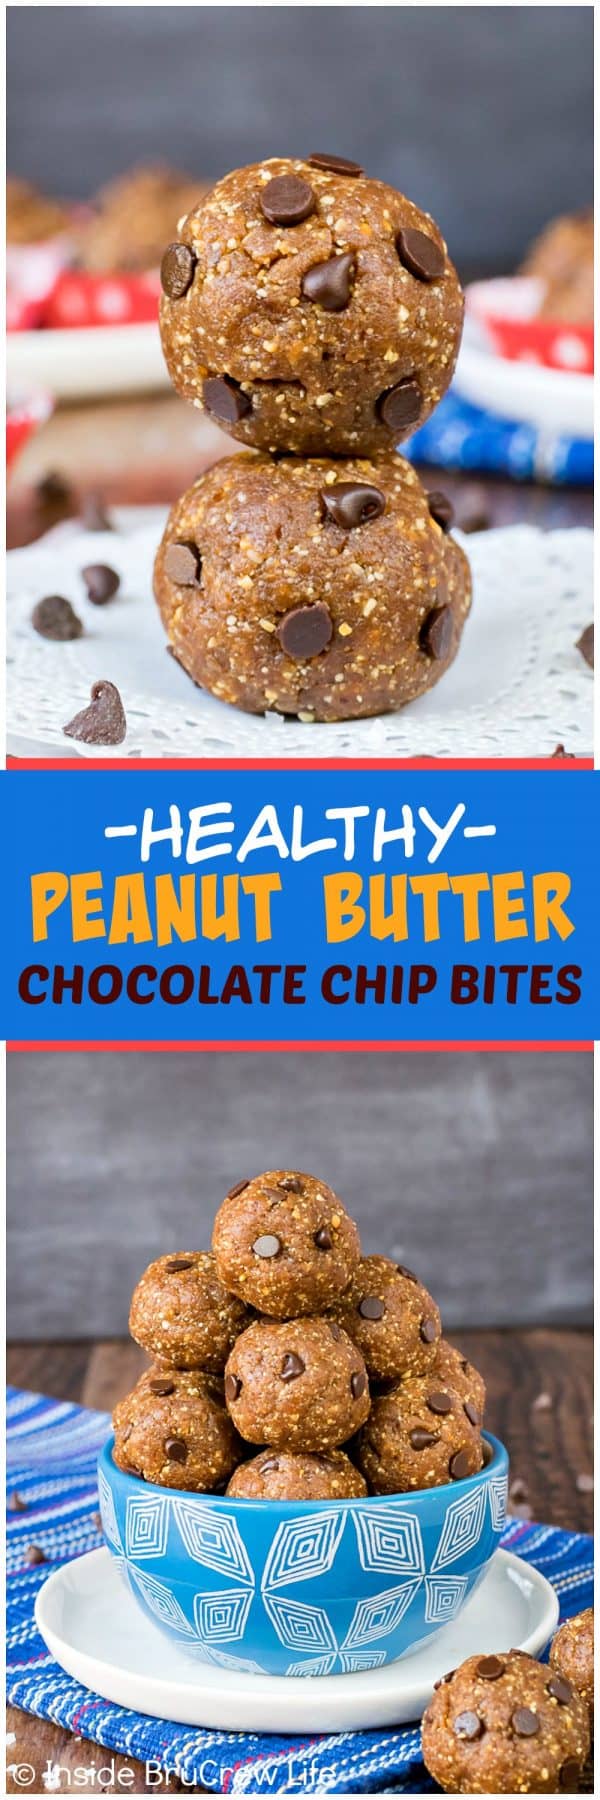 Healthy Peanut Butter Chocolate Chip Bites - you are only 4 ingredients and 10 minutes away from having these healthy little energy bites in your refrigerator. Great recipe to keep on hand when you need a sweet yet healthy snack. #nobake #healthysnack #peanutbutter #chocolate #energybites #sweettreat #homemade #healthy 